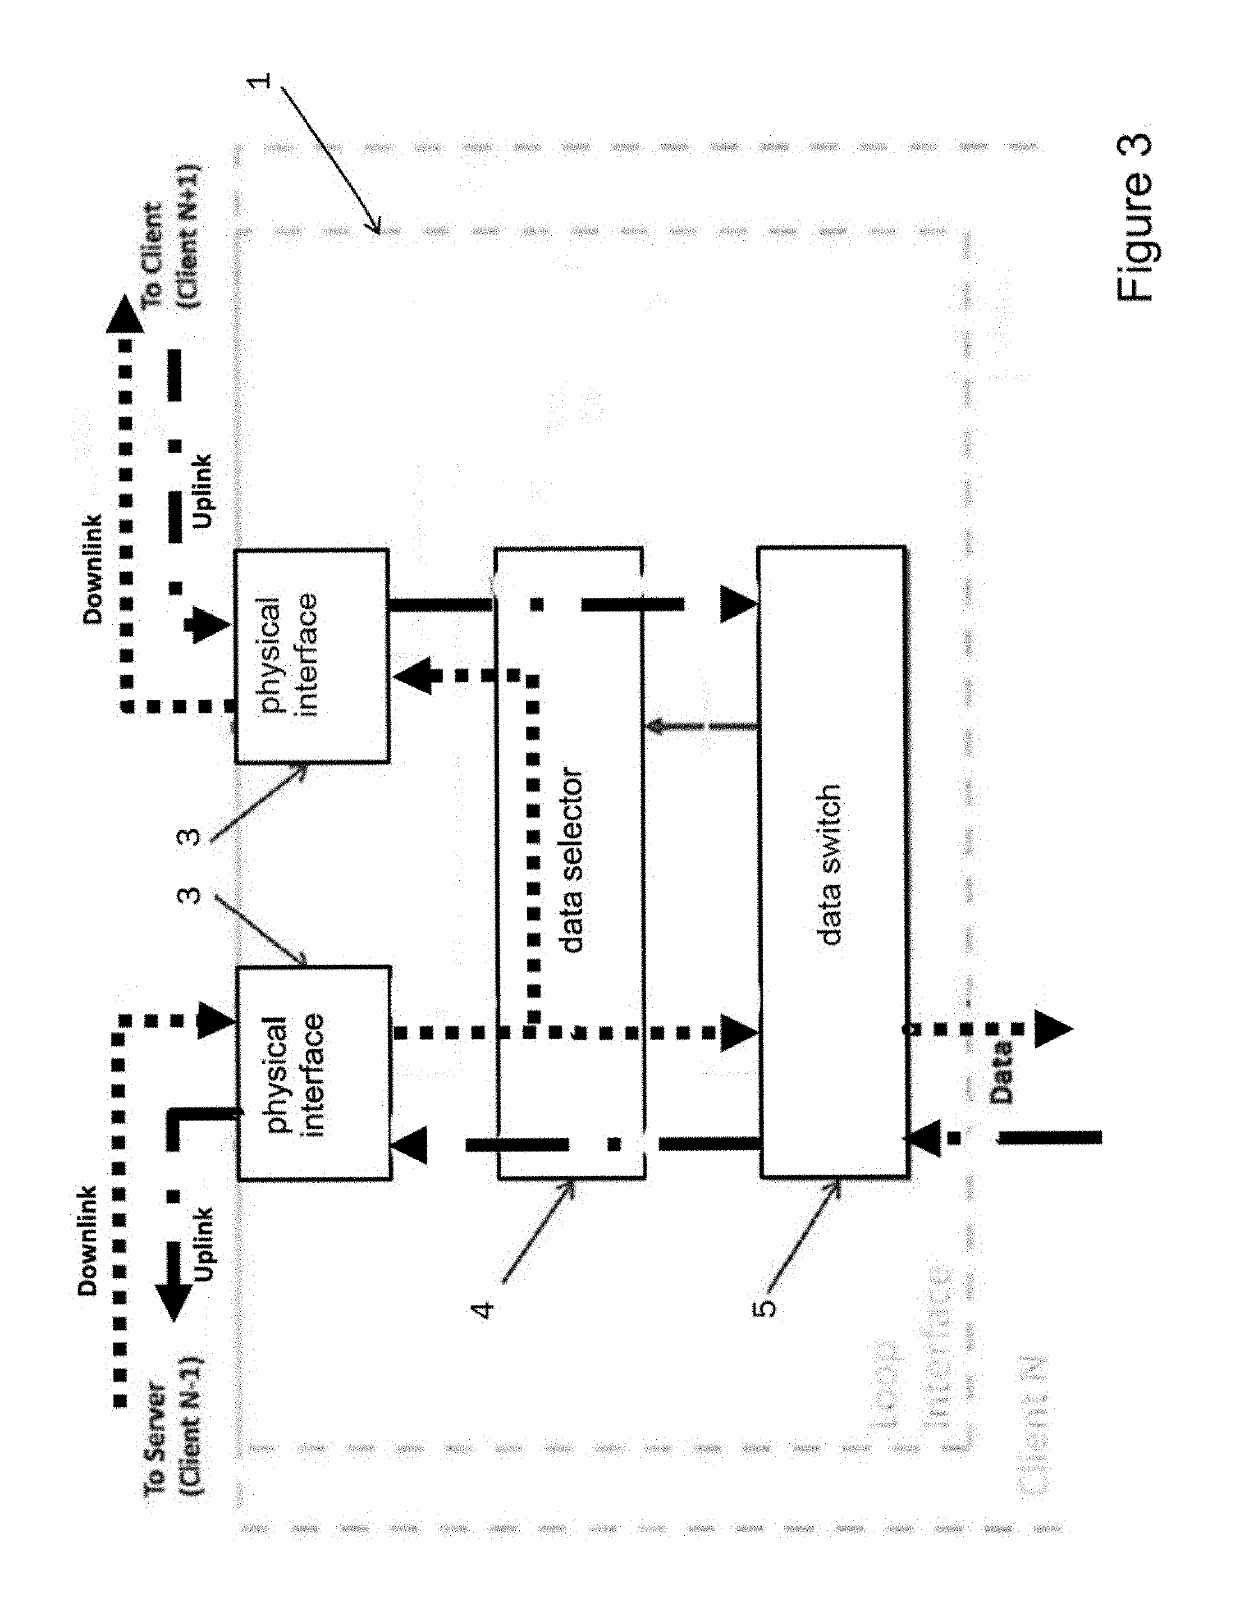 Network interface, network and method for data transmission within the network